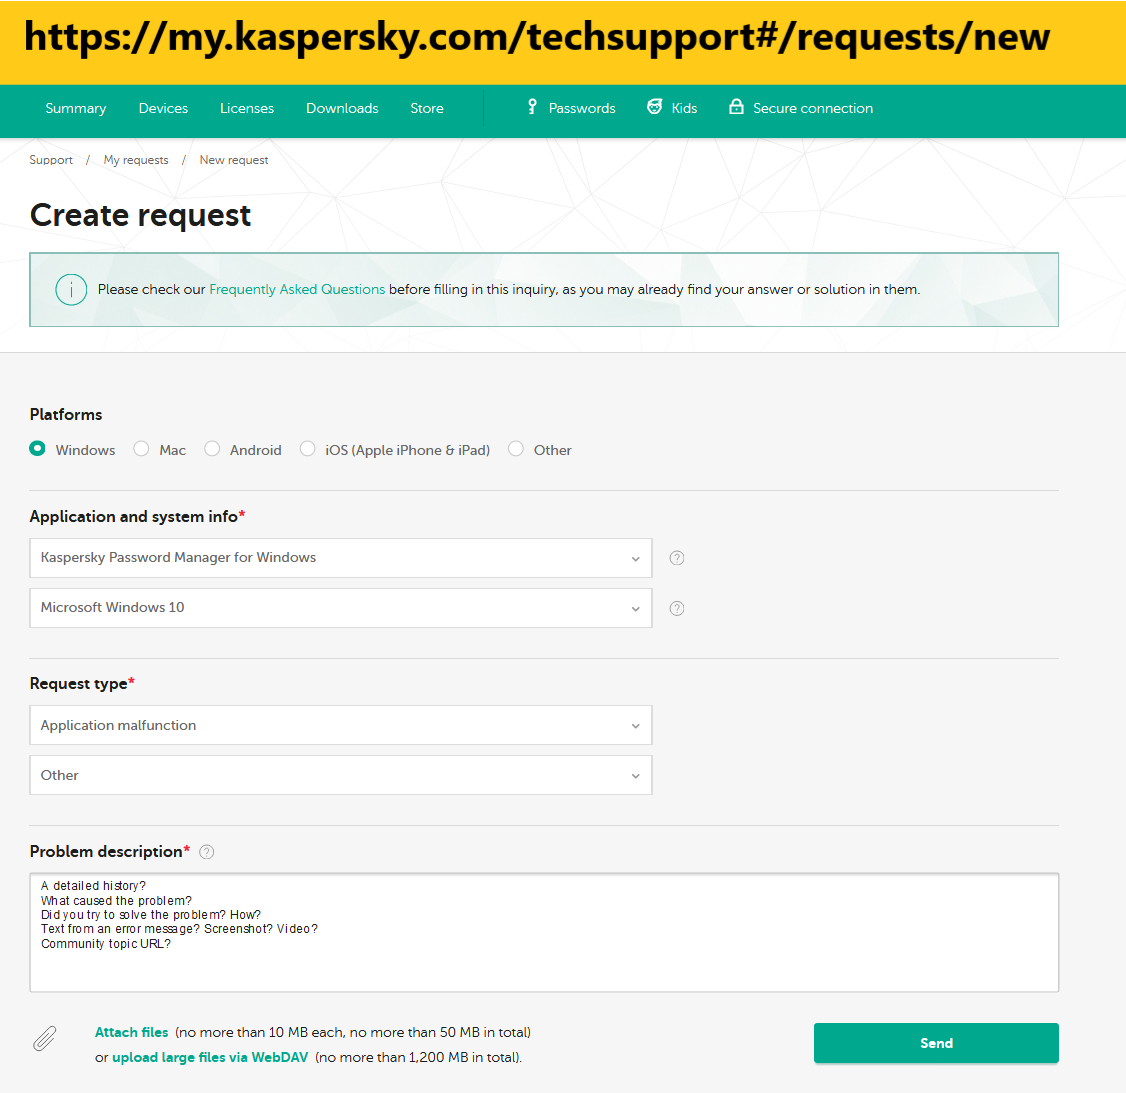 kaspersky password manager flaw that bruteforced